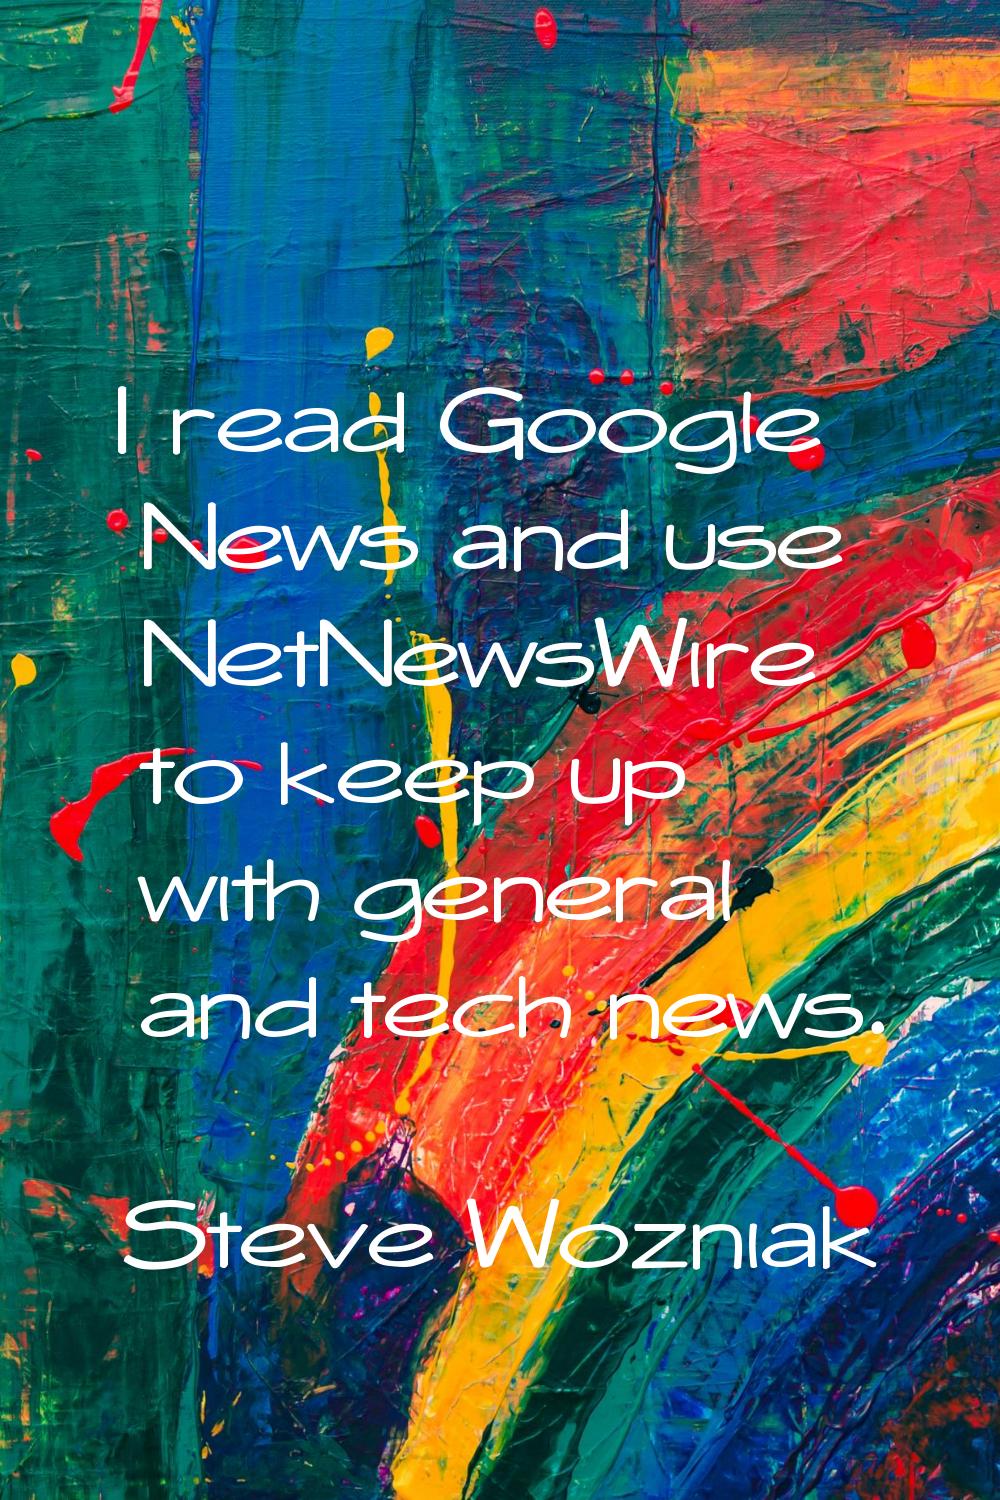 I read Google News and use NetNewsWire to keep up with general and tech news.